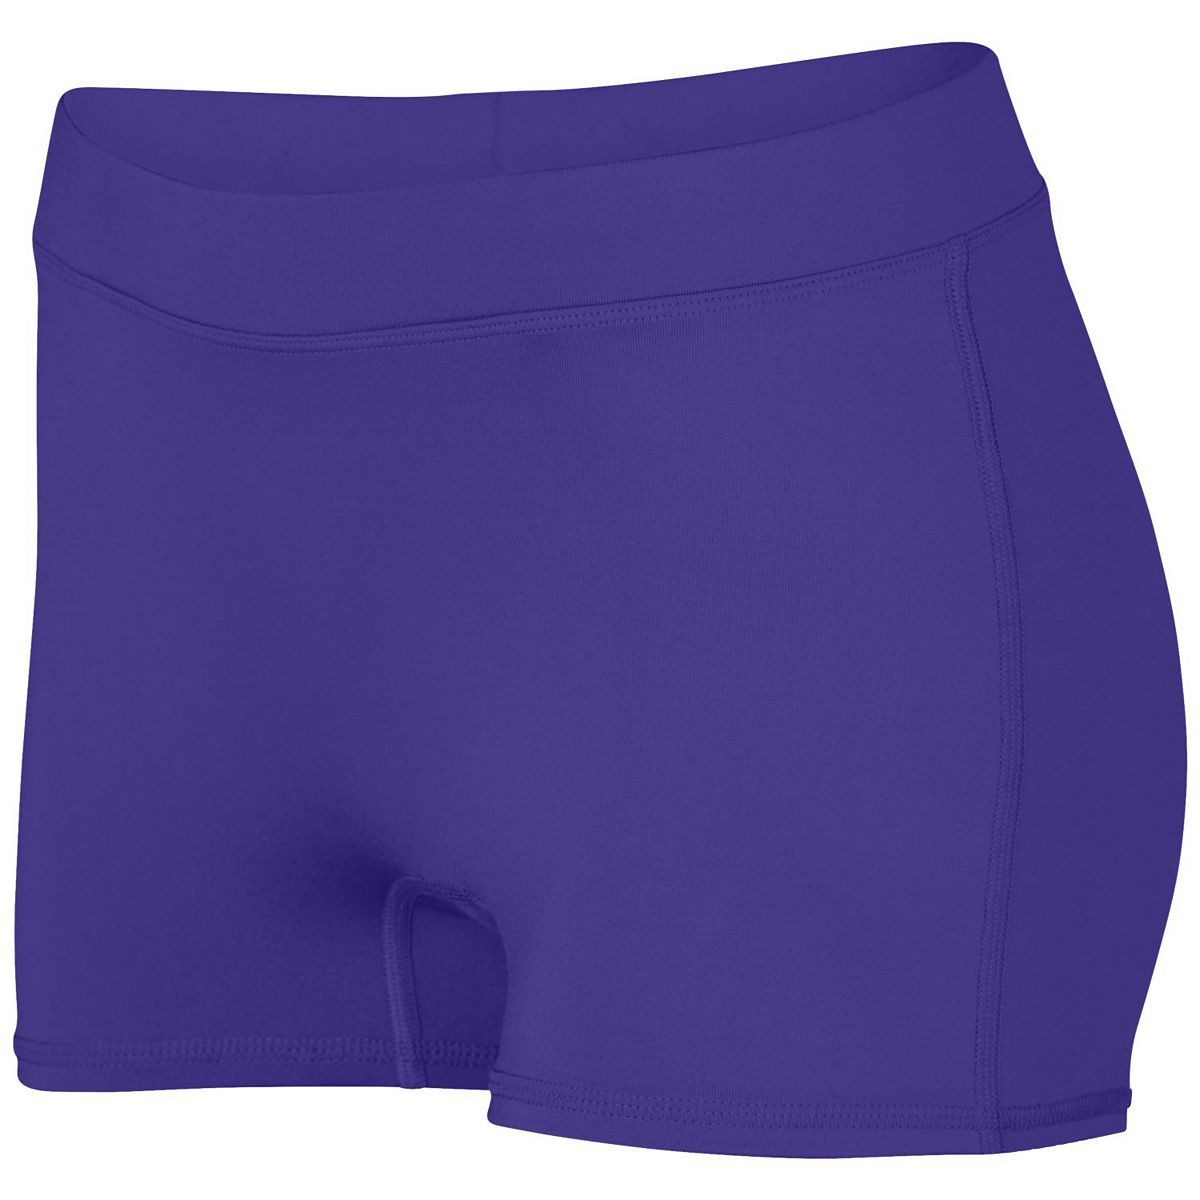 Augusta Sportswear Girls Dare Shorts in Purple  -Part of the Girls, Augusta-Products, Volleyball, Girls-Shorts product lines at KanaleyCreations.com